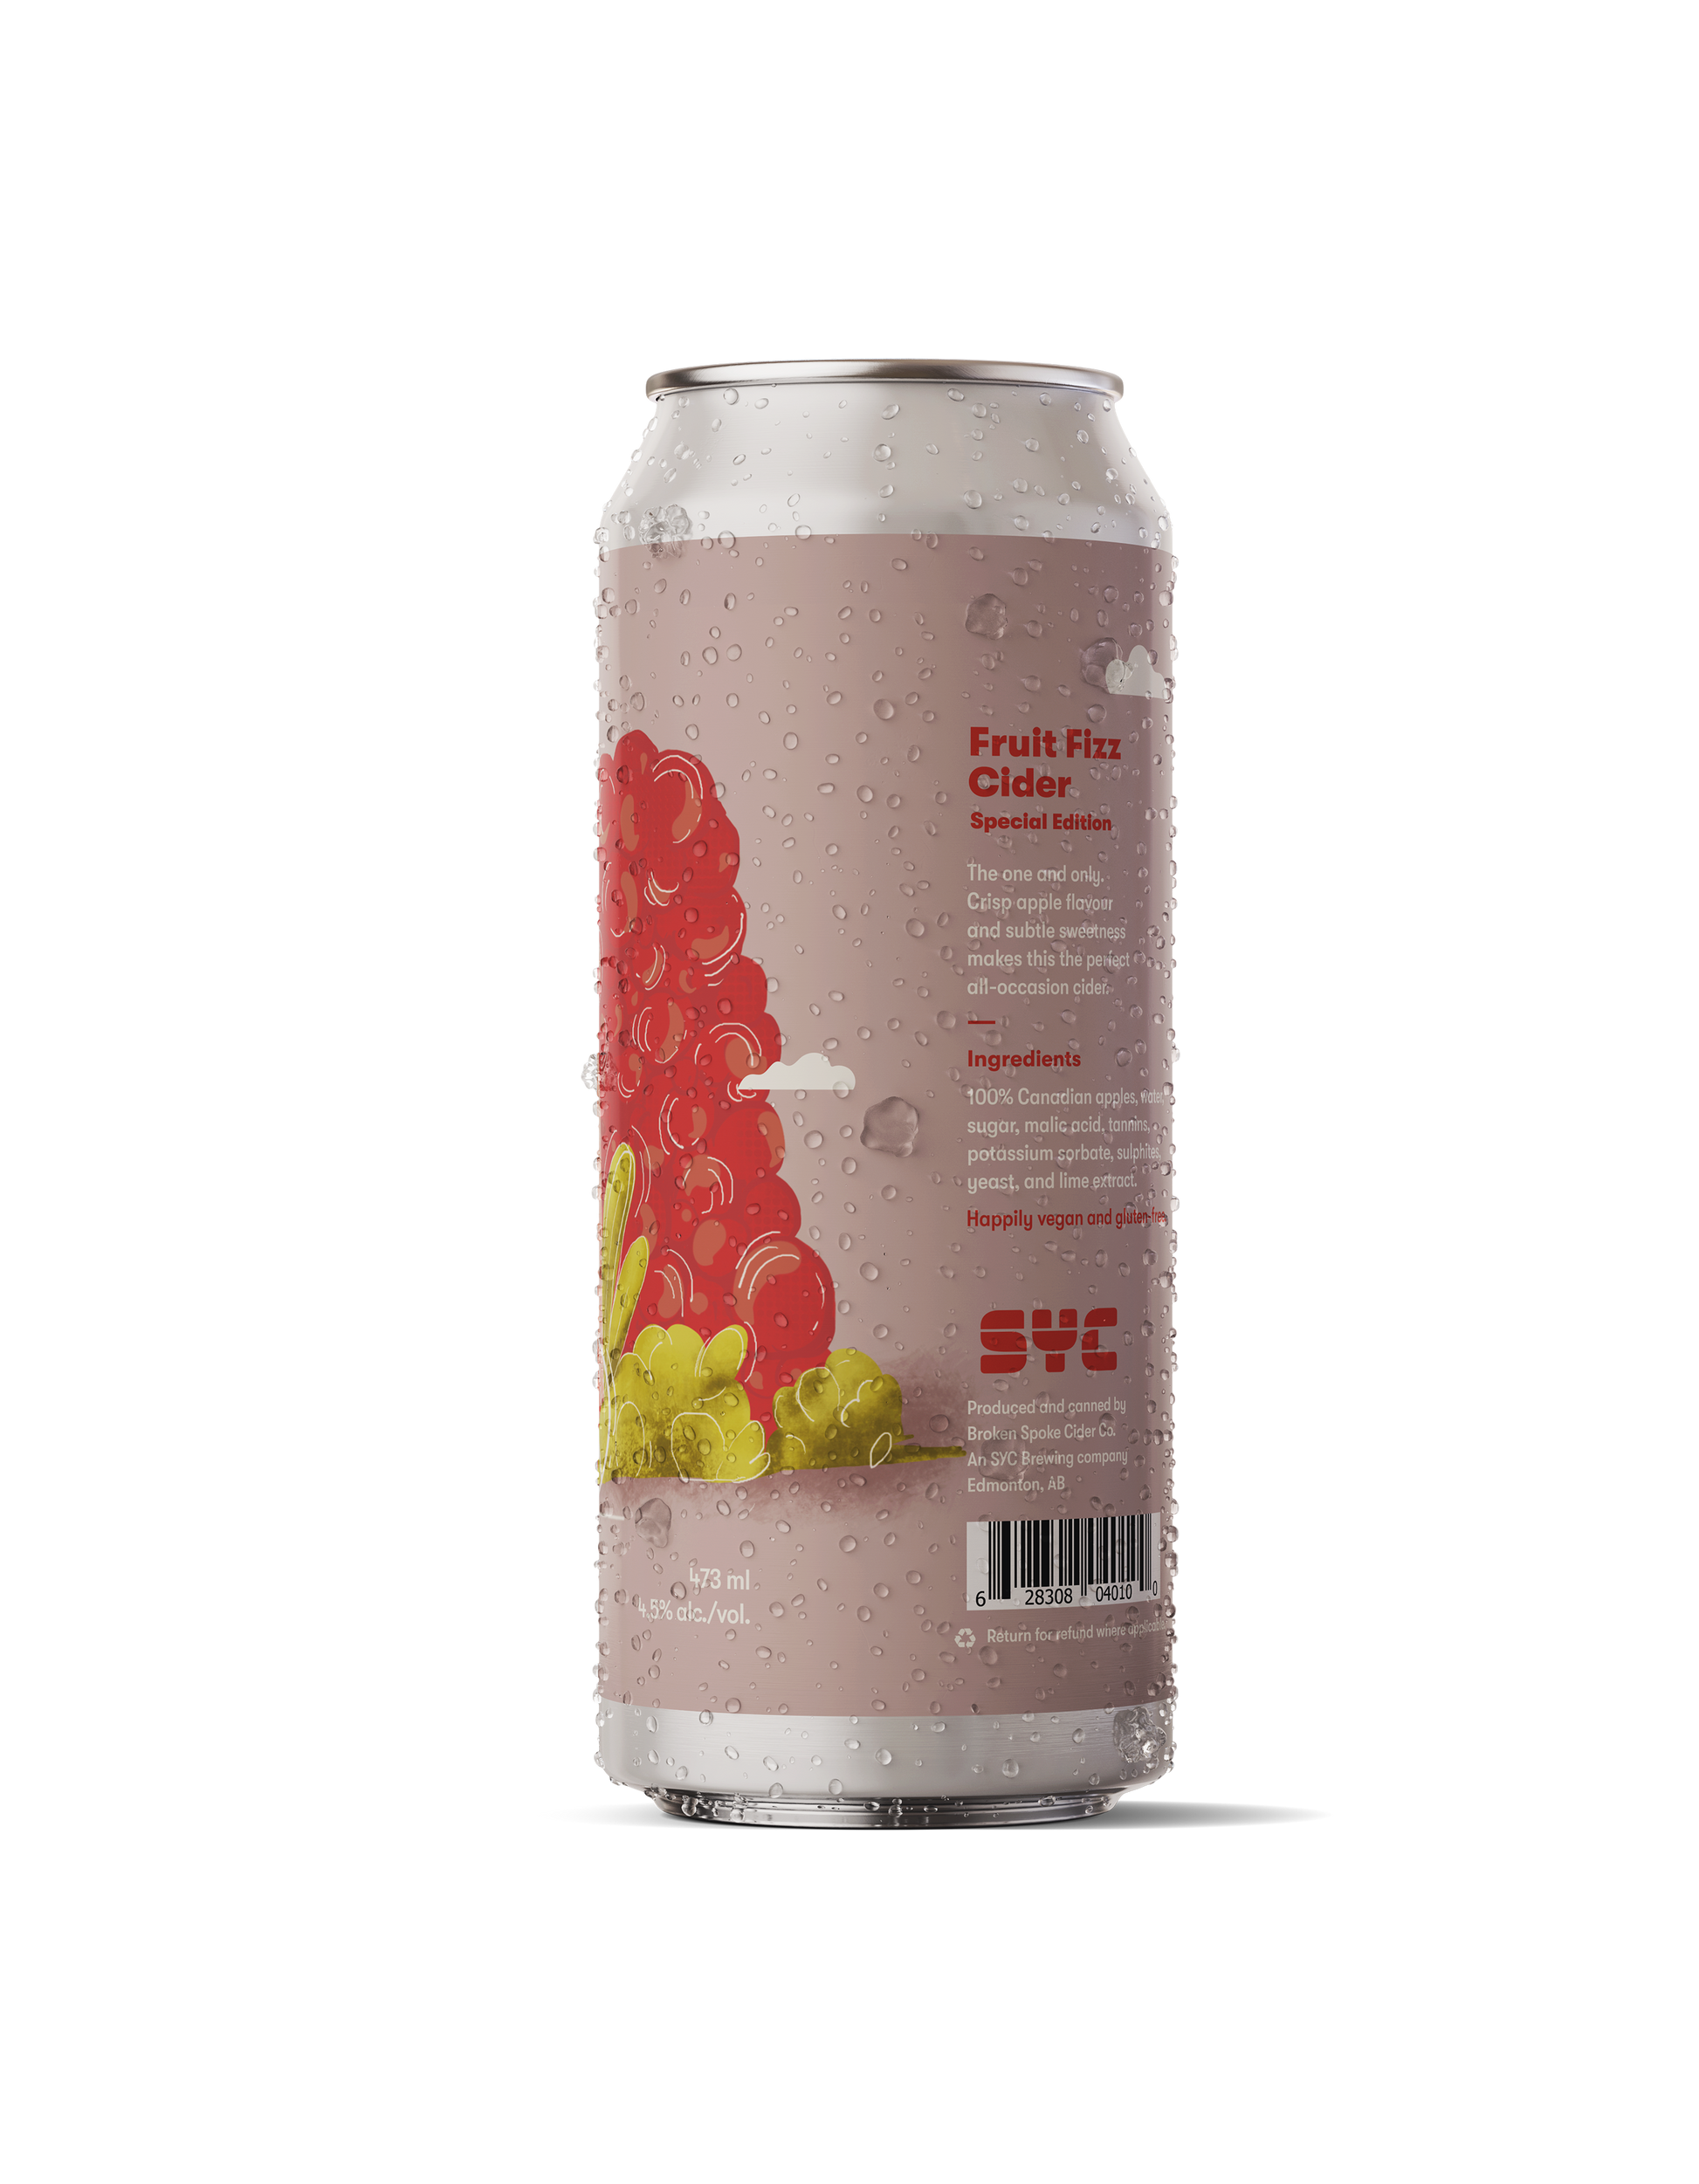 Right of Can Fruit Fizz Cider